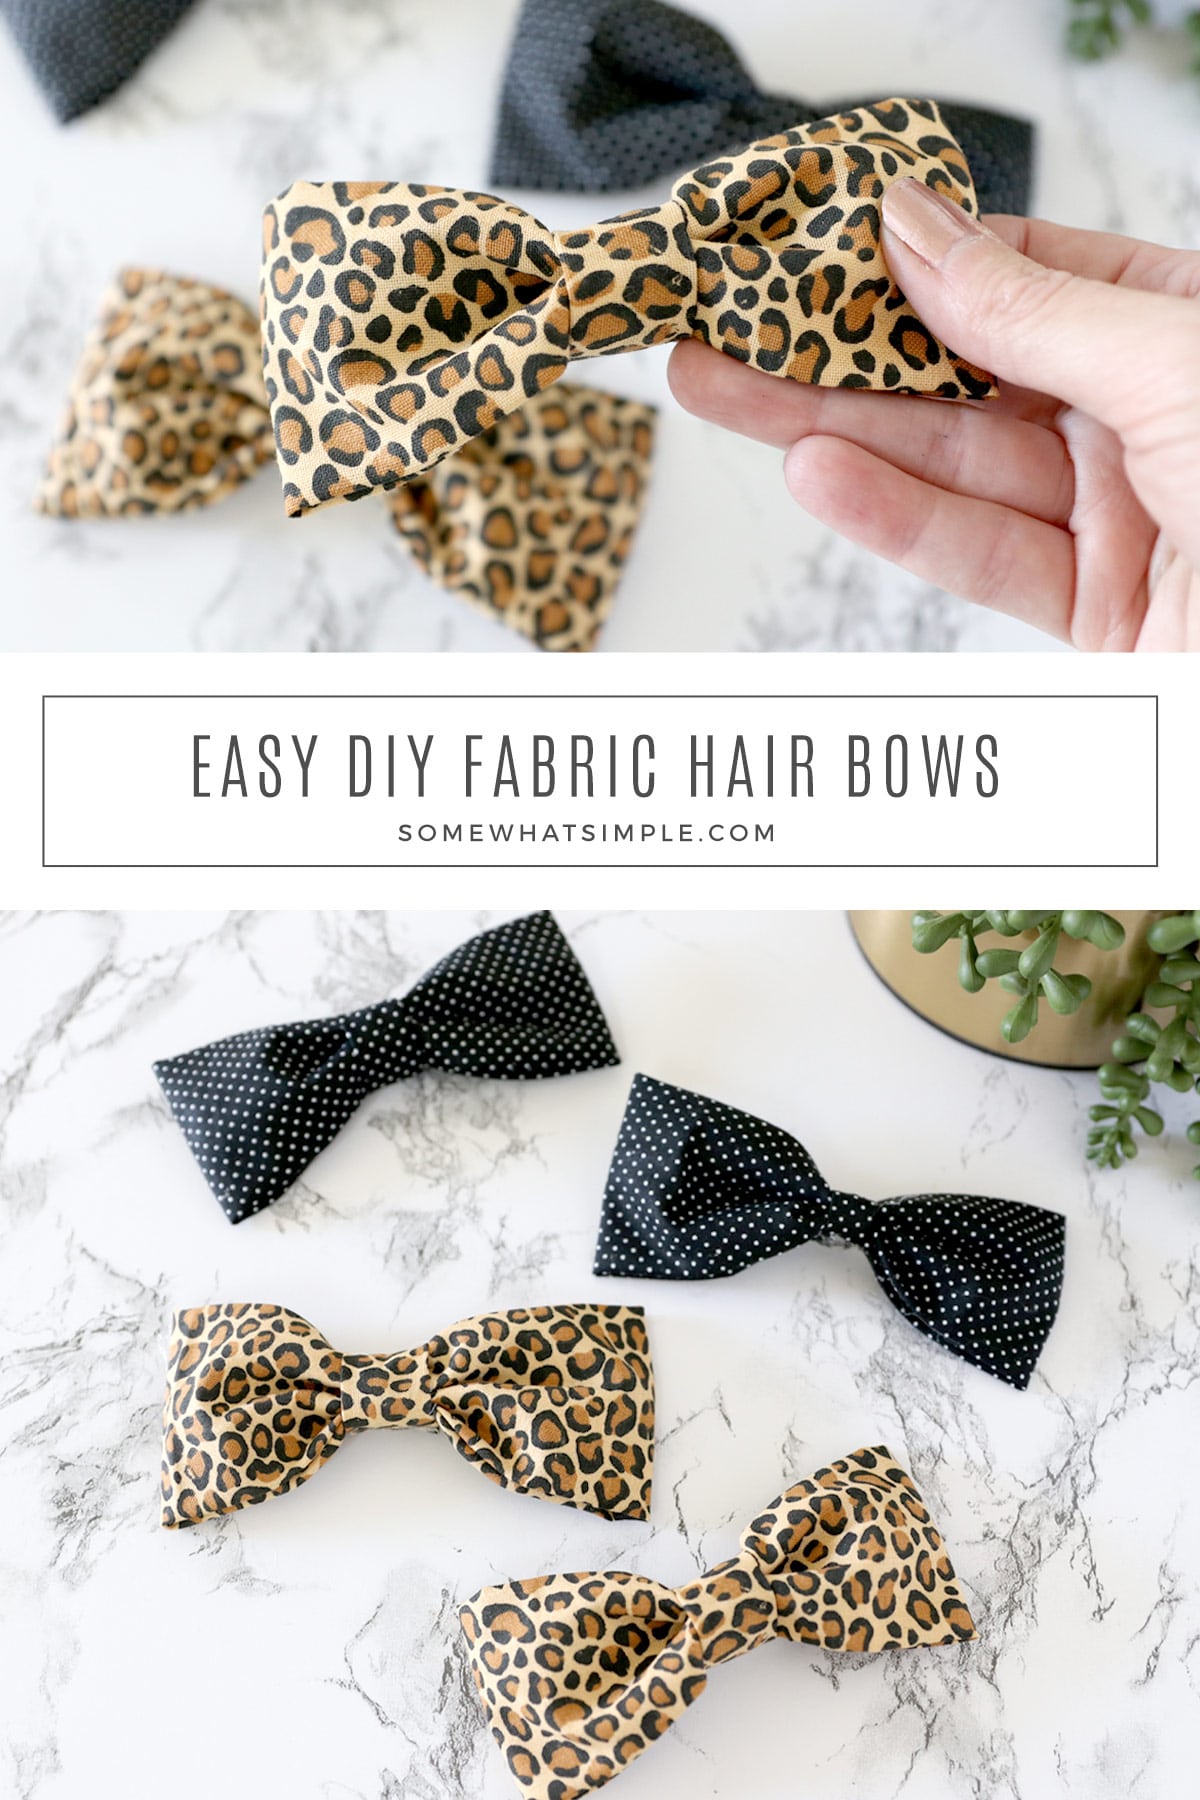 A fabric hair bow is a simple accessory that can be made in under 5 minutes! This no-sew bow is going to look darling in your little girl's hair! via @somewhatsimple